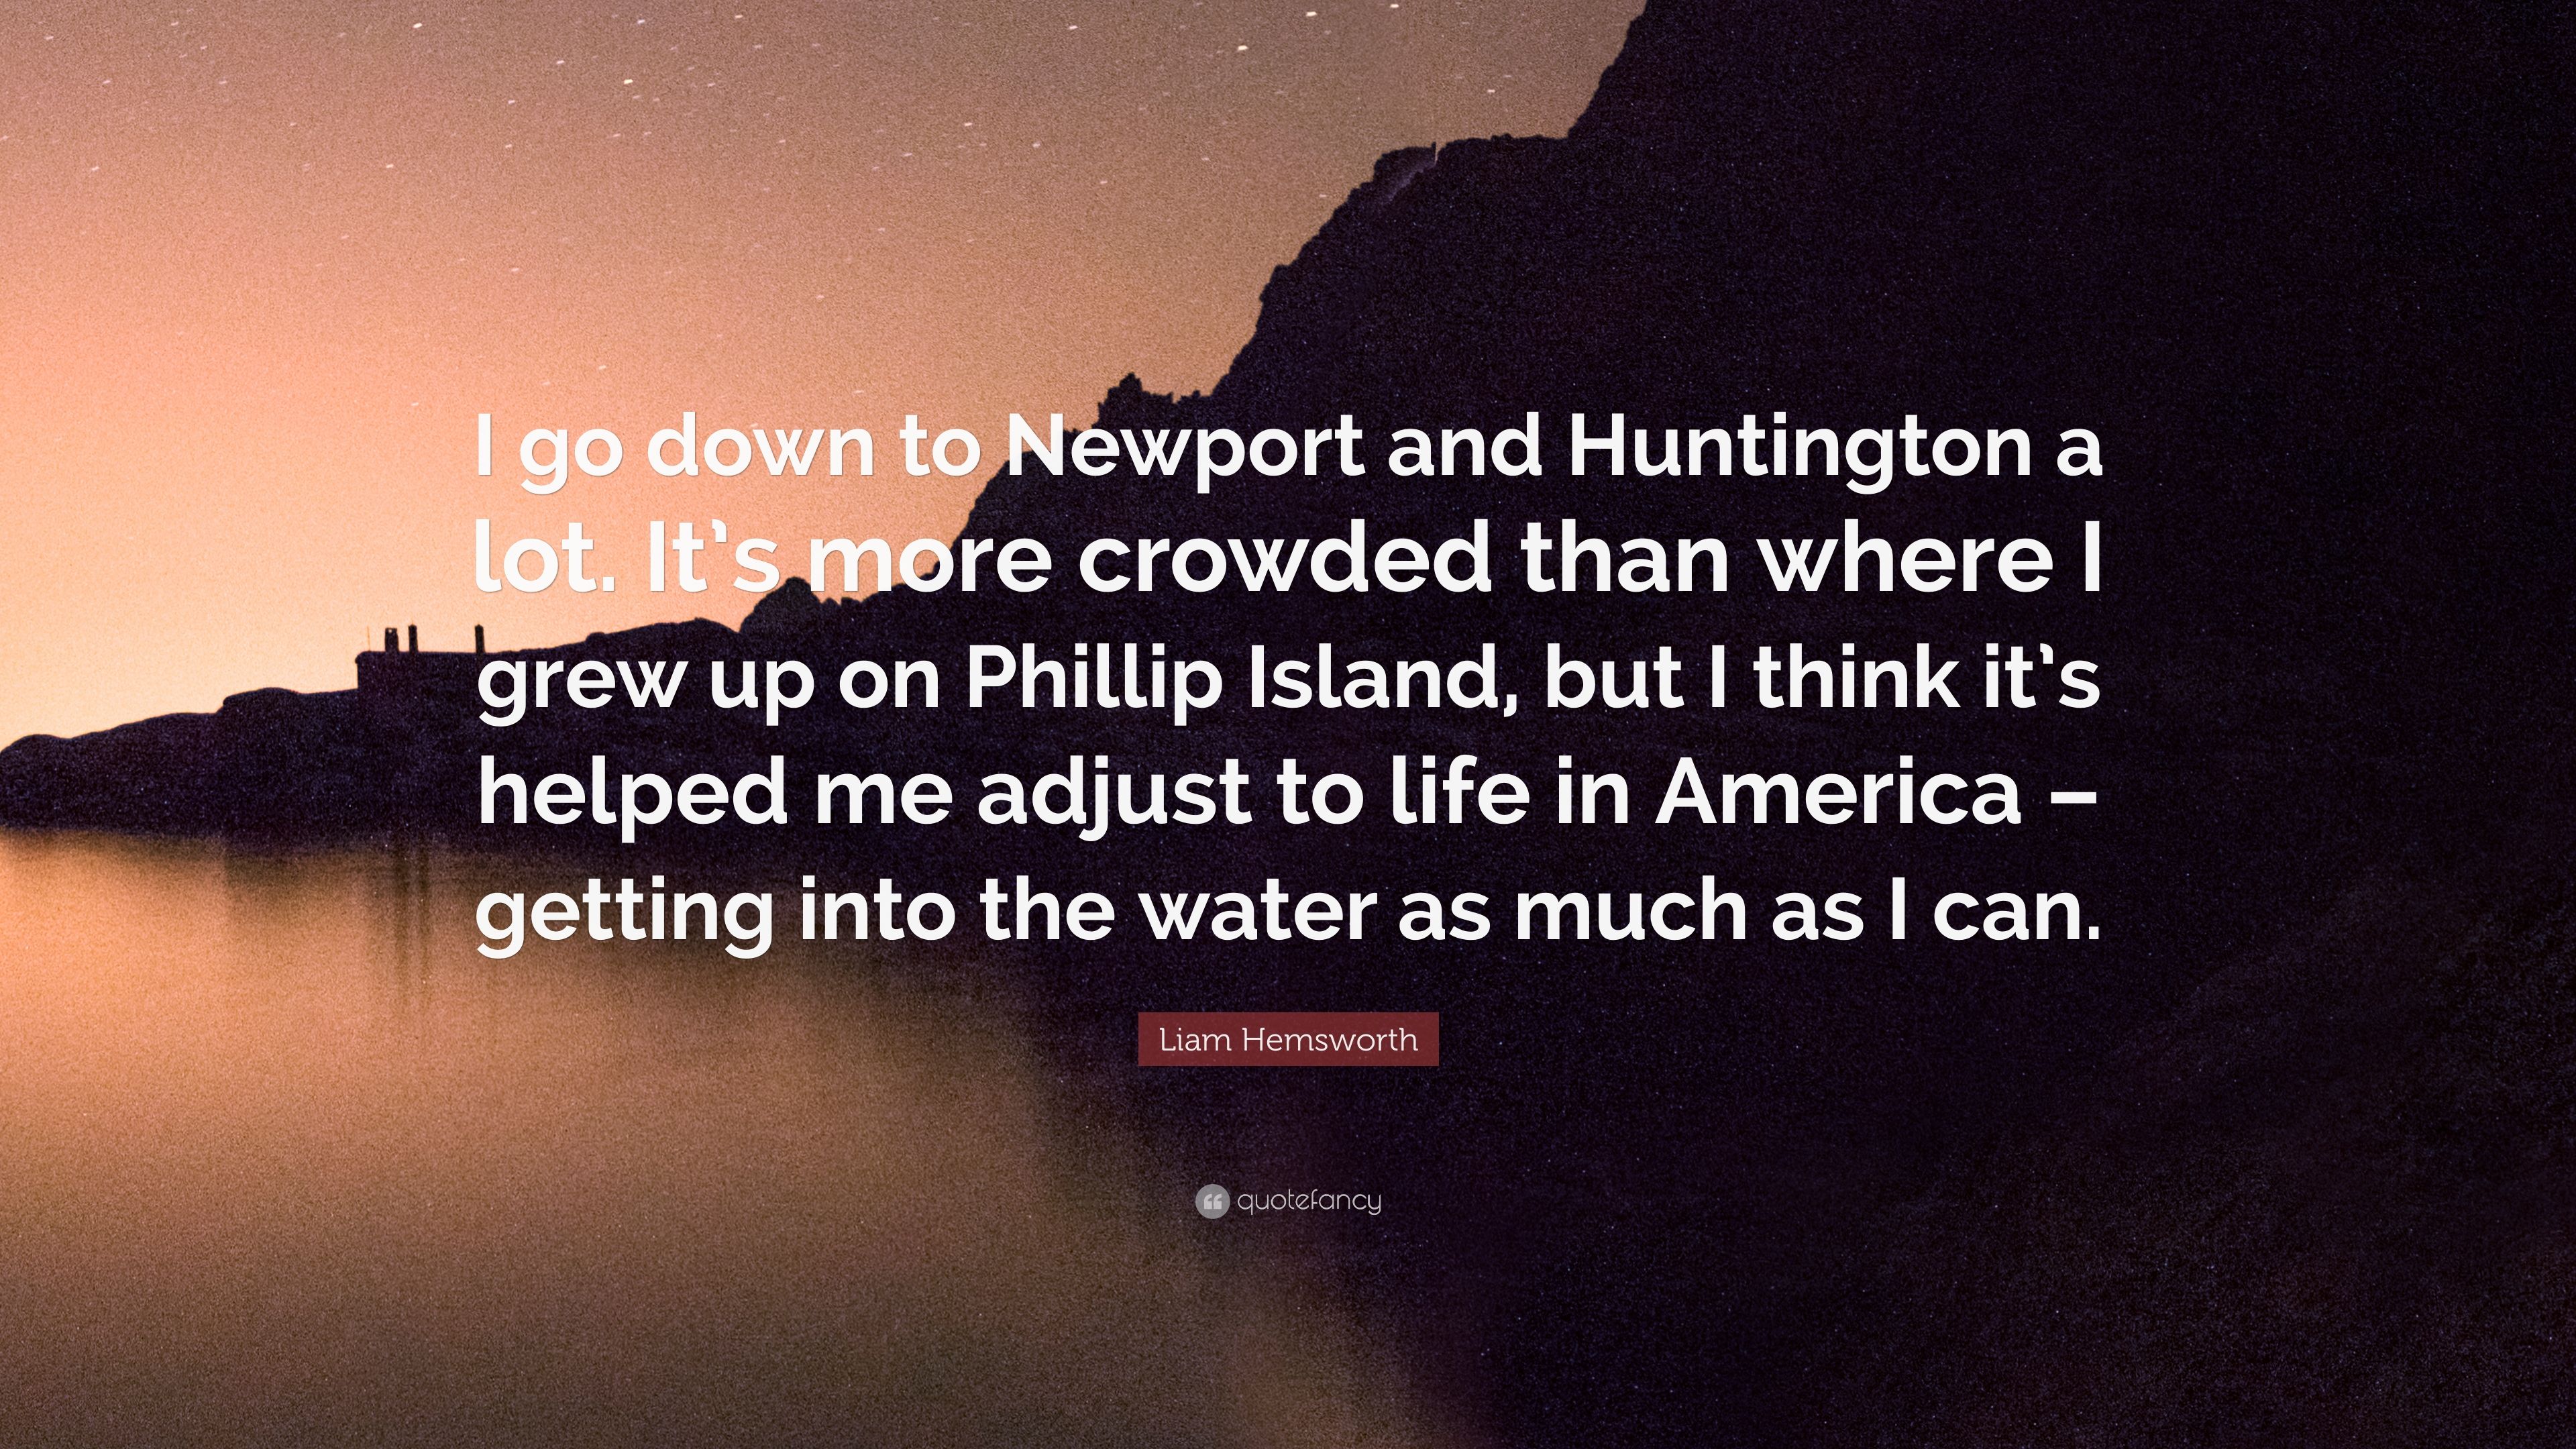 Liam Hemsworth Quote: “I go down to Newport and Huntington a lot